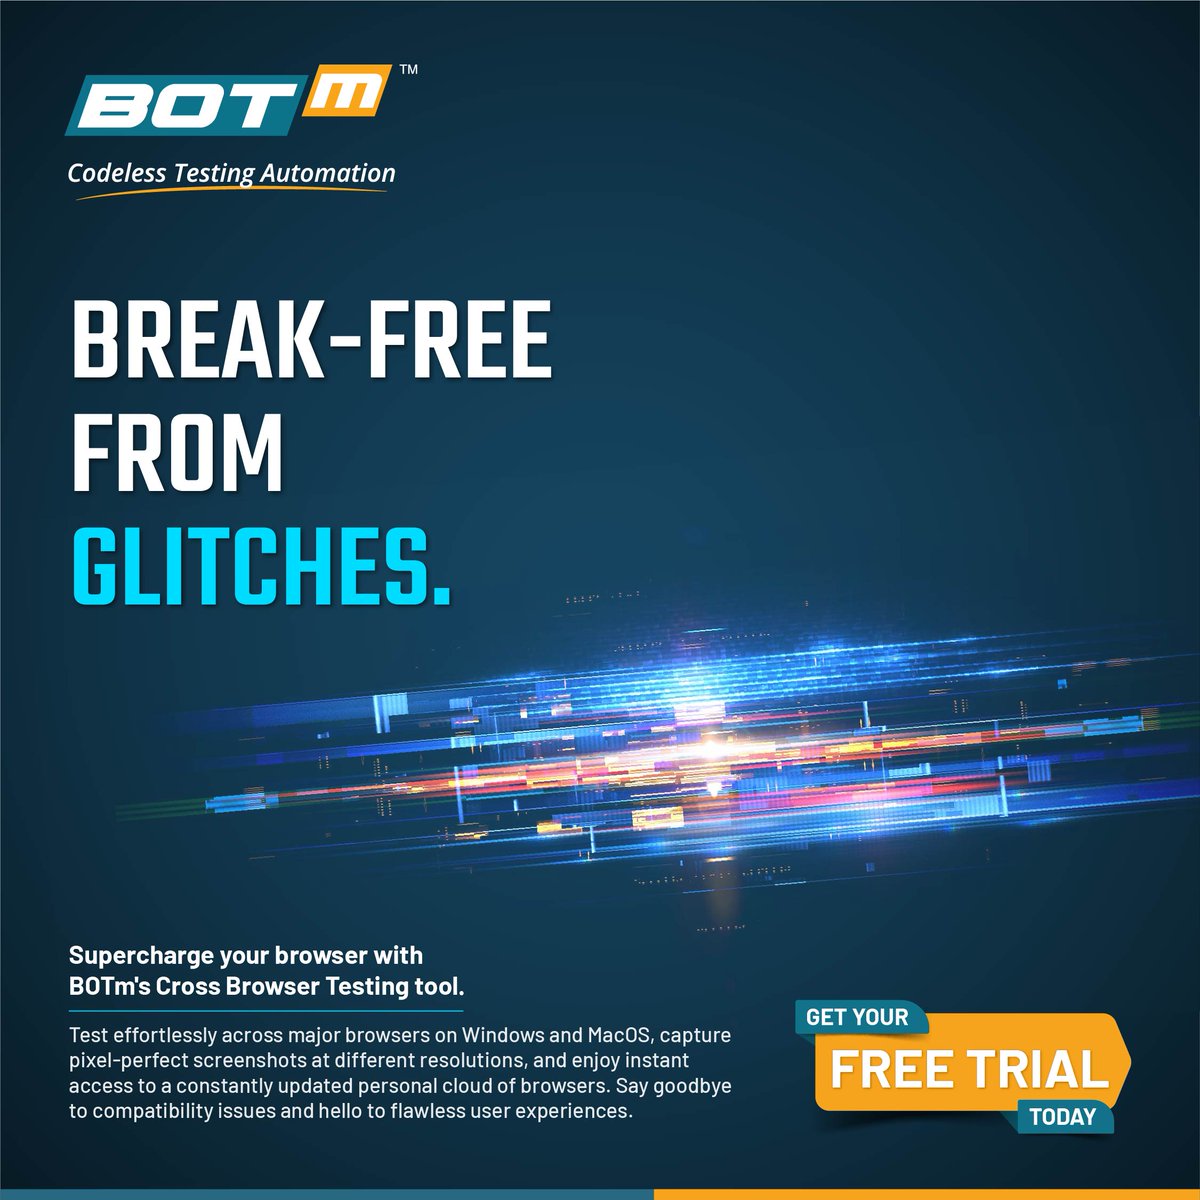 Seamless browsing experience across all platforms with BOTm's Cross Browser Testing Tool.

Get your Free Trial: botmtesting.com/lp/mobile-test…

#BOTm #automatedtesting #Automated #mobileapptesting #apptesting #freetesting  #automation #mobileappsolutions #crossbrowsertesting #browser